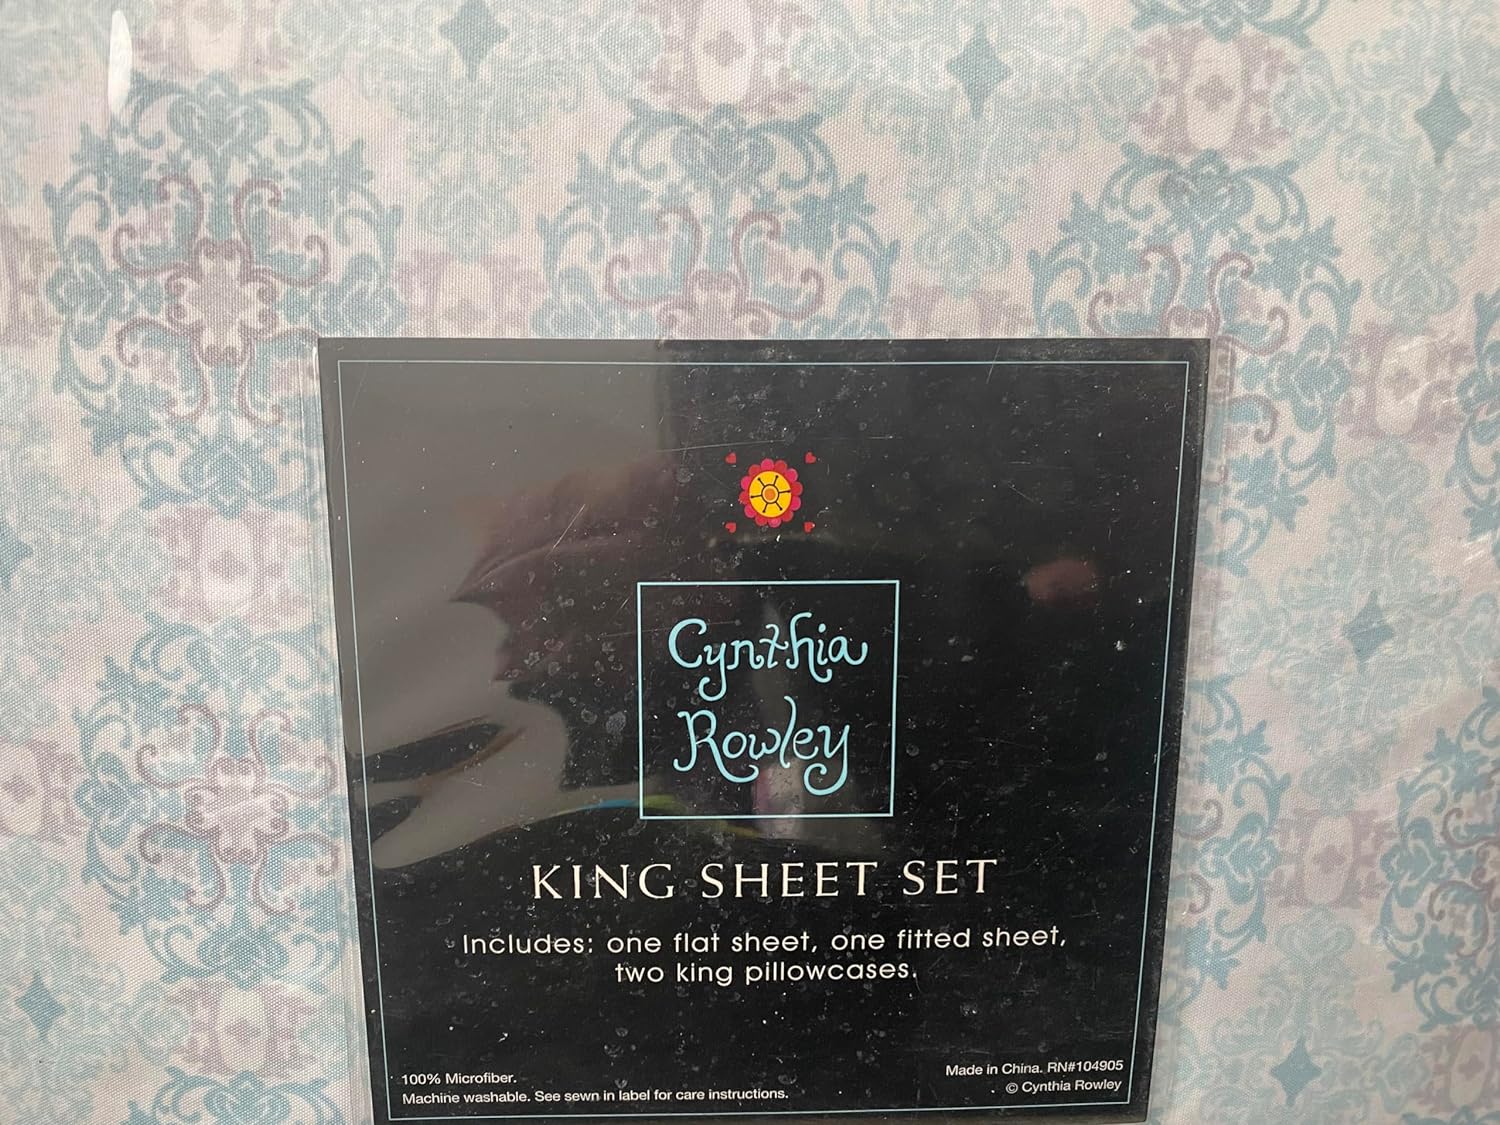 Cynthia Rowley 4 Piece King Sheet Set. Blue And Gray Medallions. 100% Polyester Microfiber. - image 4 of 4